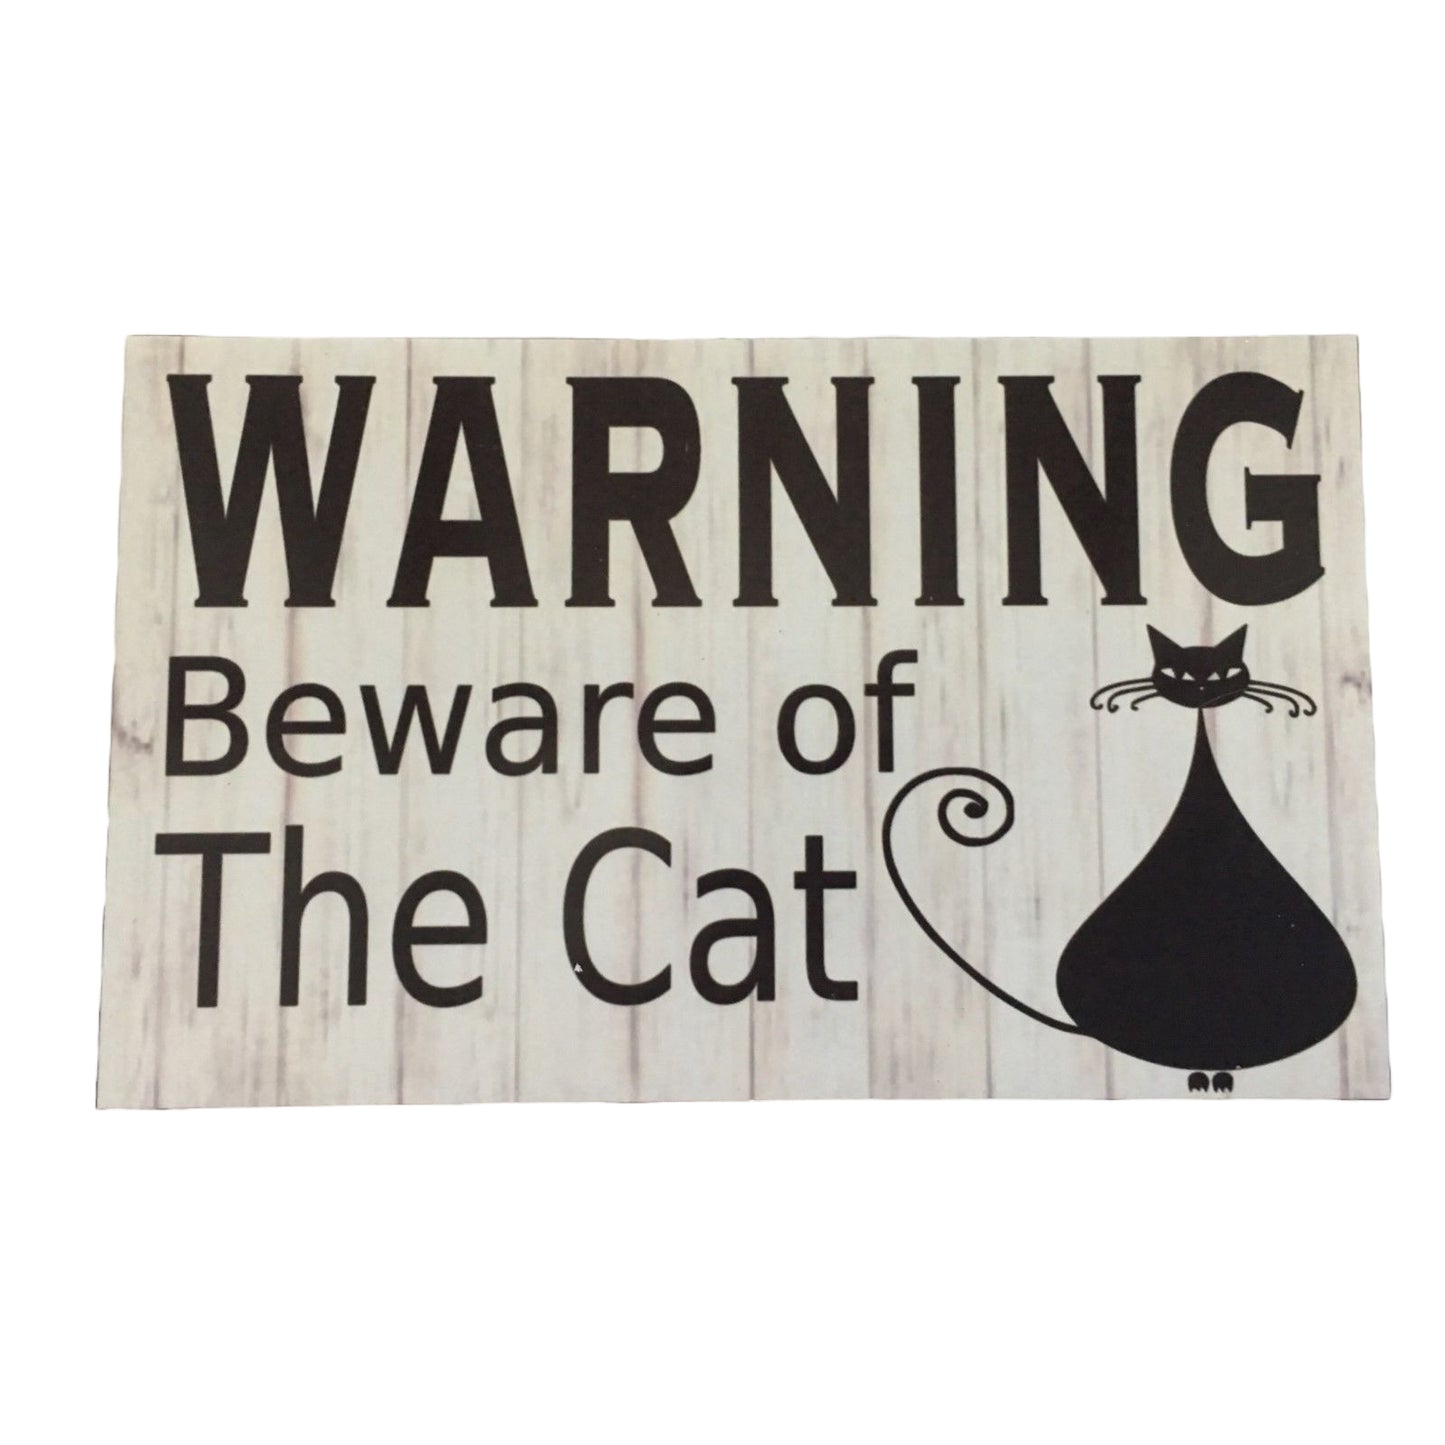 Warning Beware Of Cat Sign - The Renmy Store Homewares & Gifts 